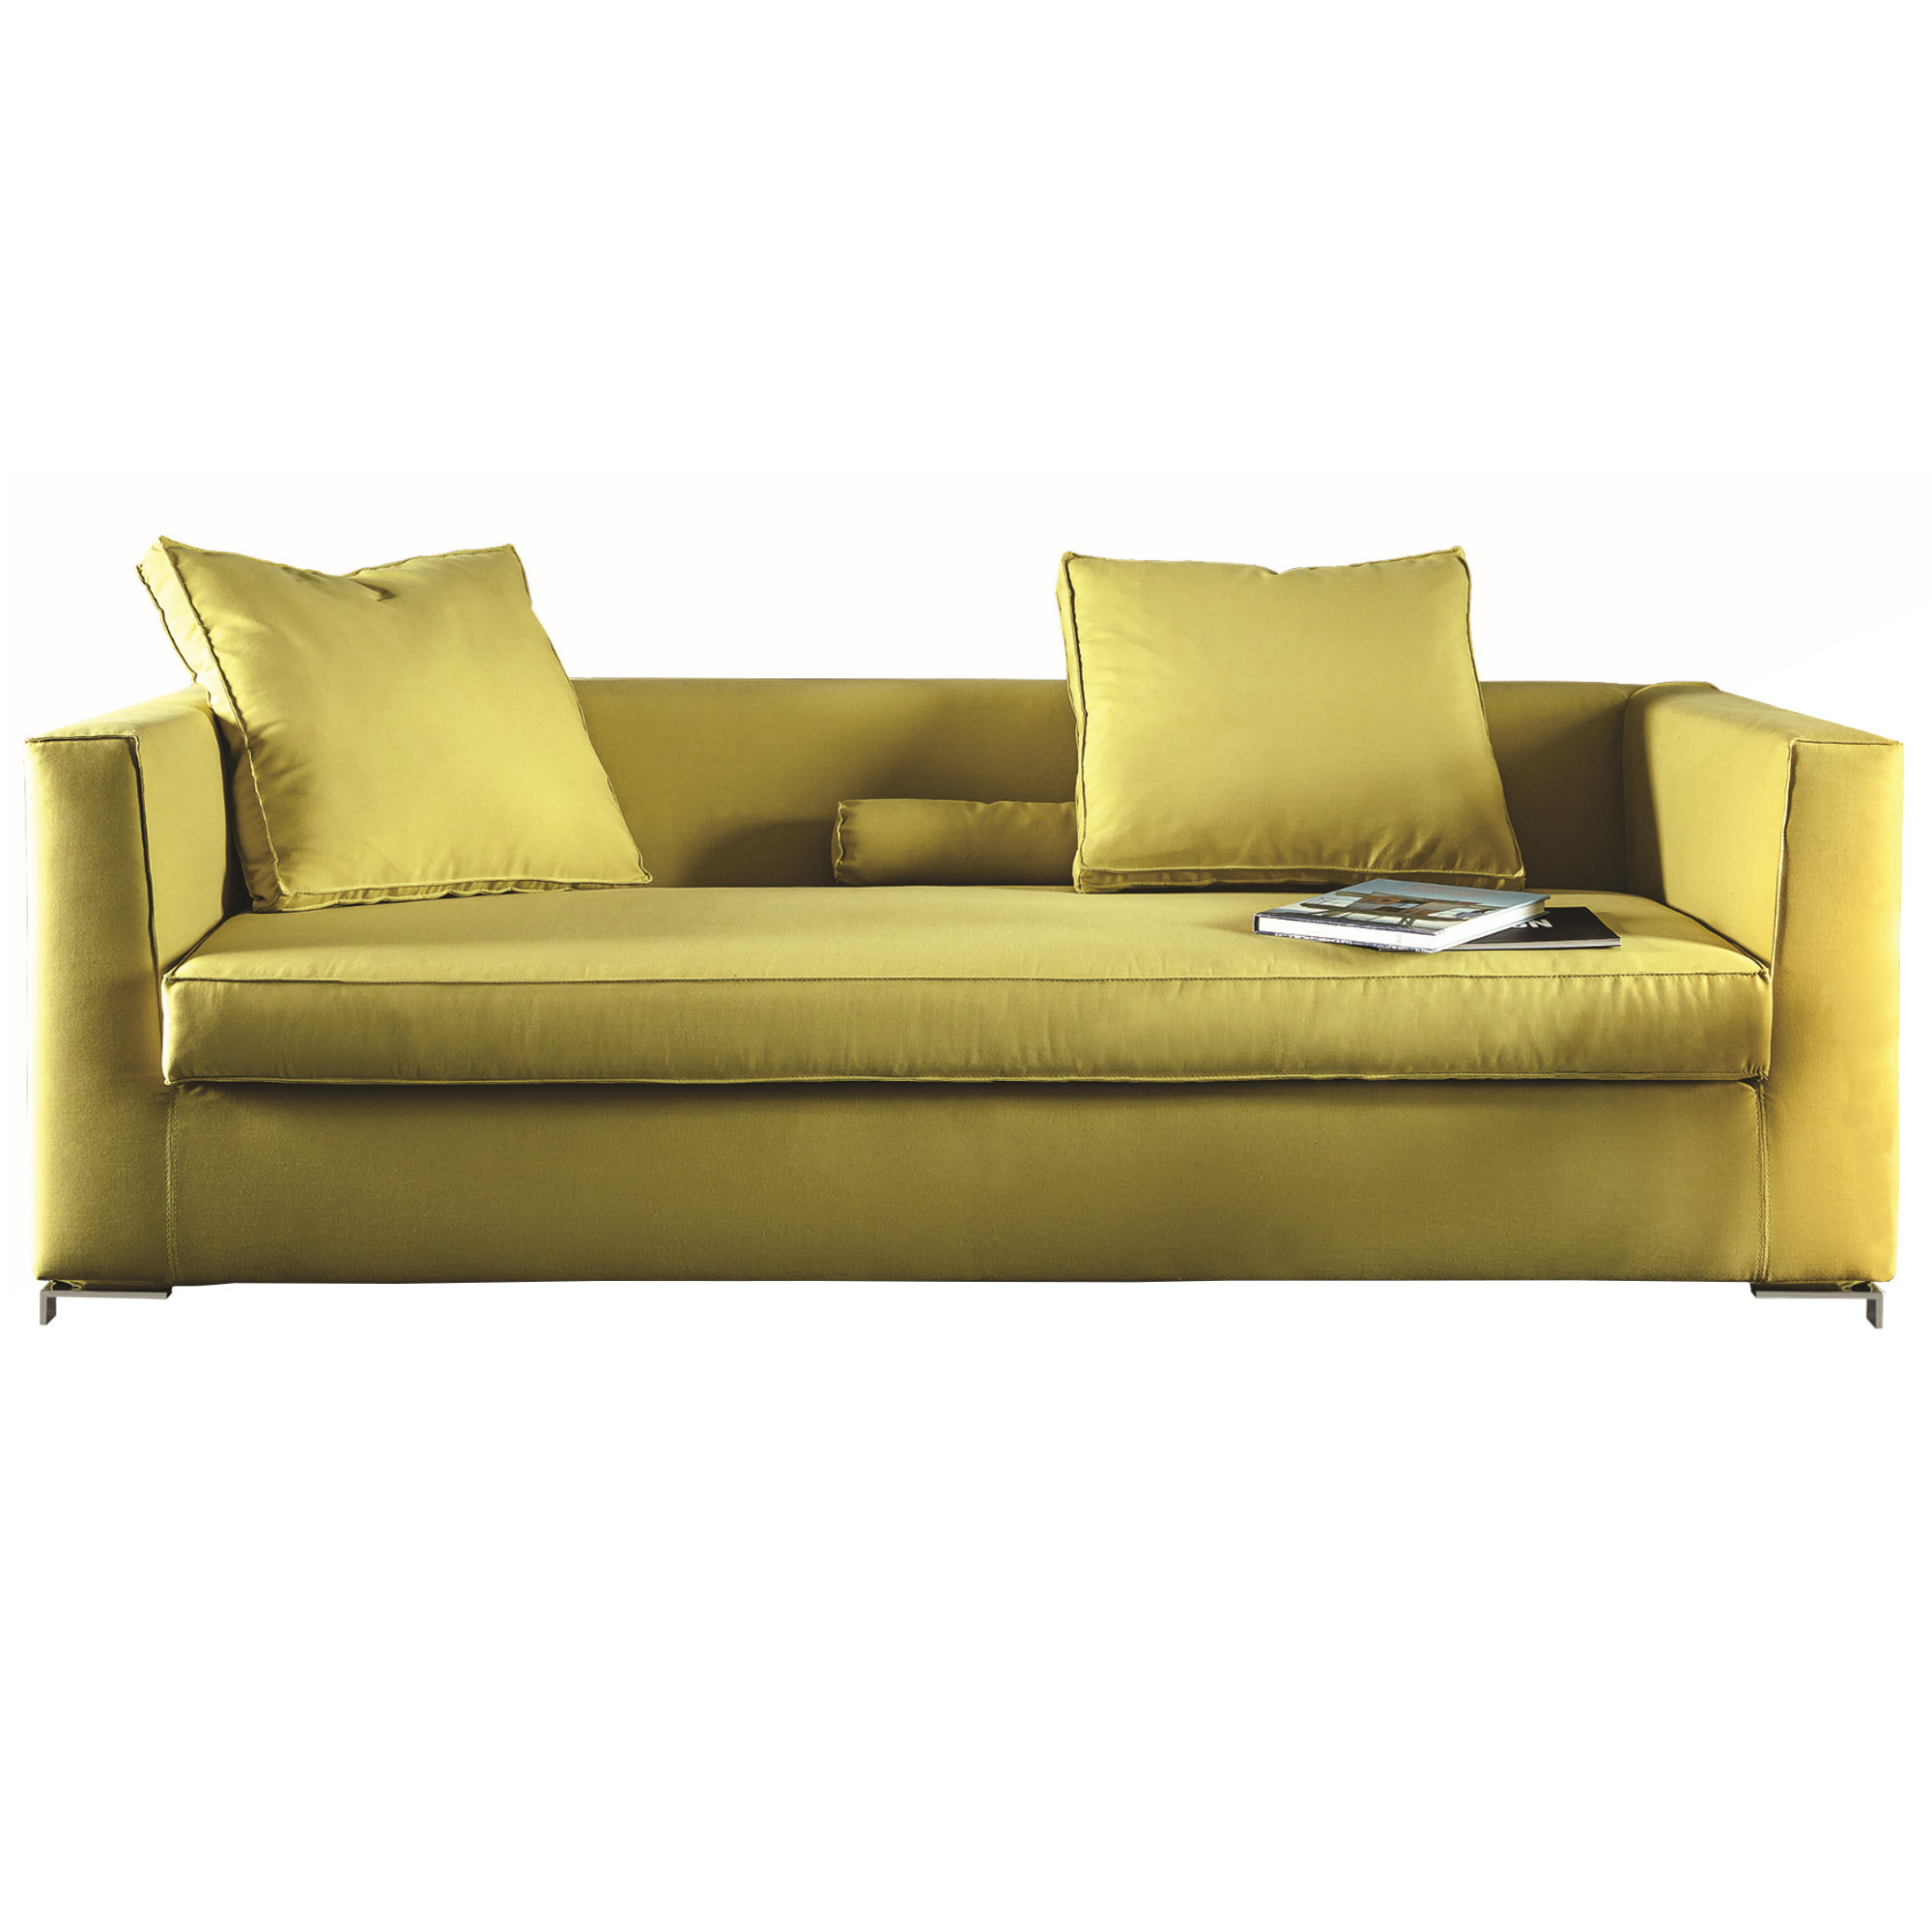 BEL AIR SOFA BED, by VIBIEFFE